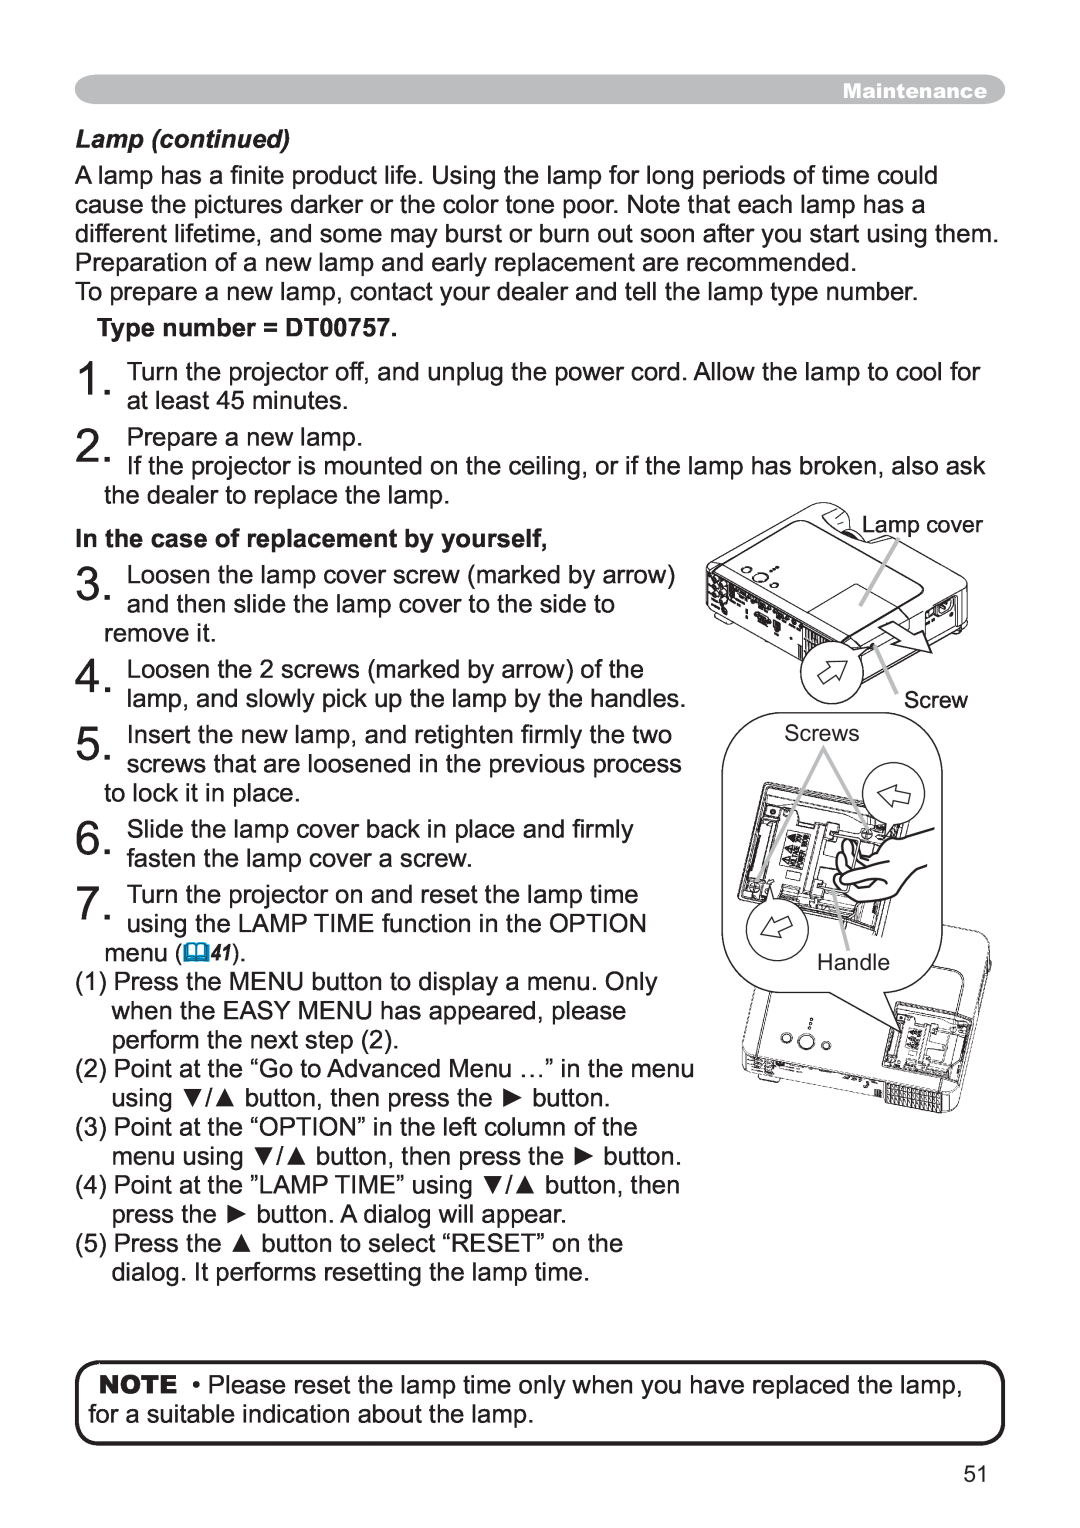 Hitachi CP-X251 user manual Lamp continued, Type number = DT00757, In the case of replacement by yourself 